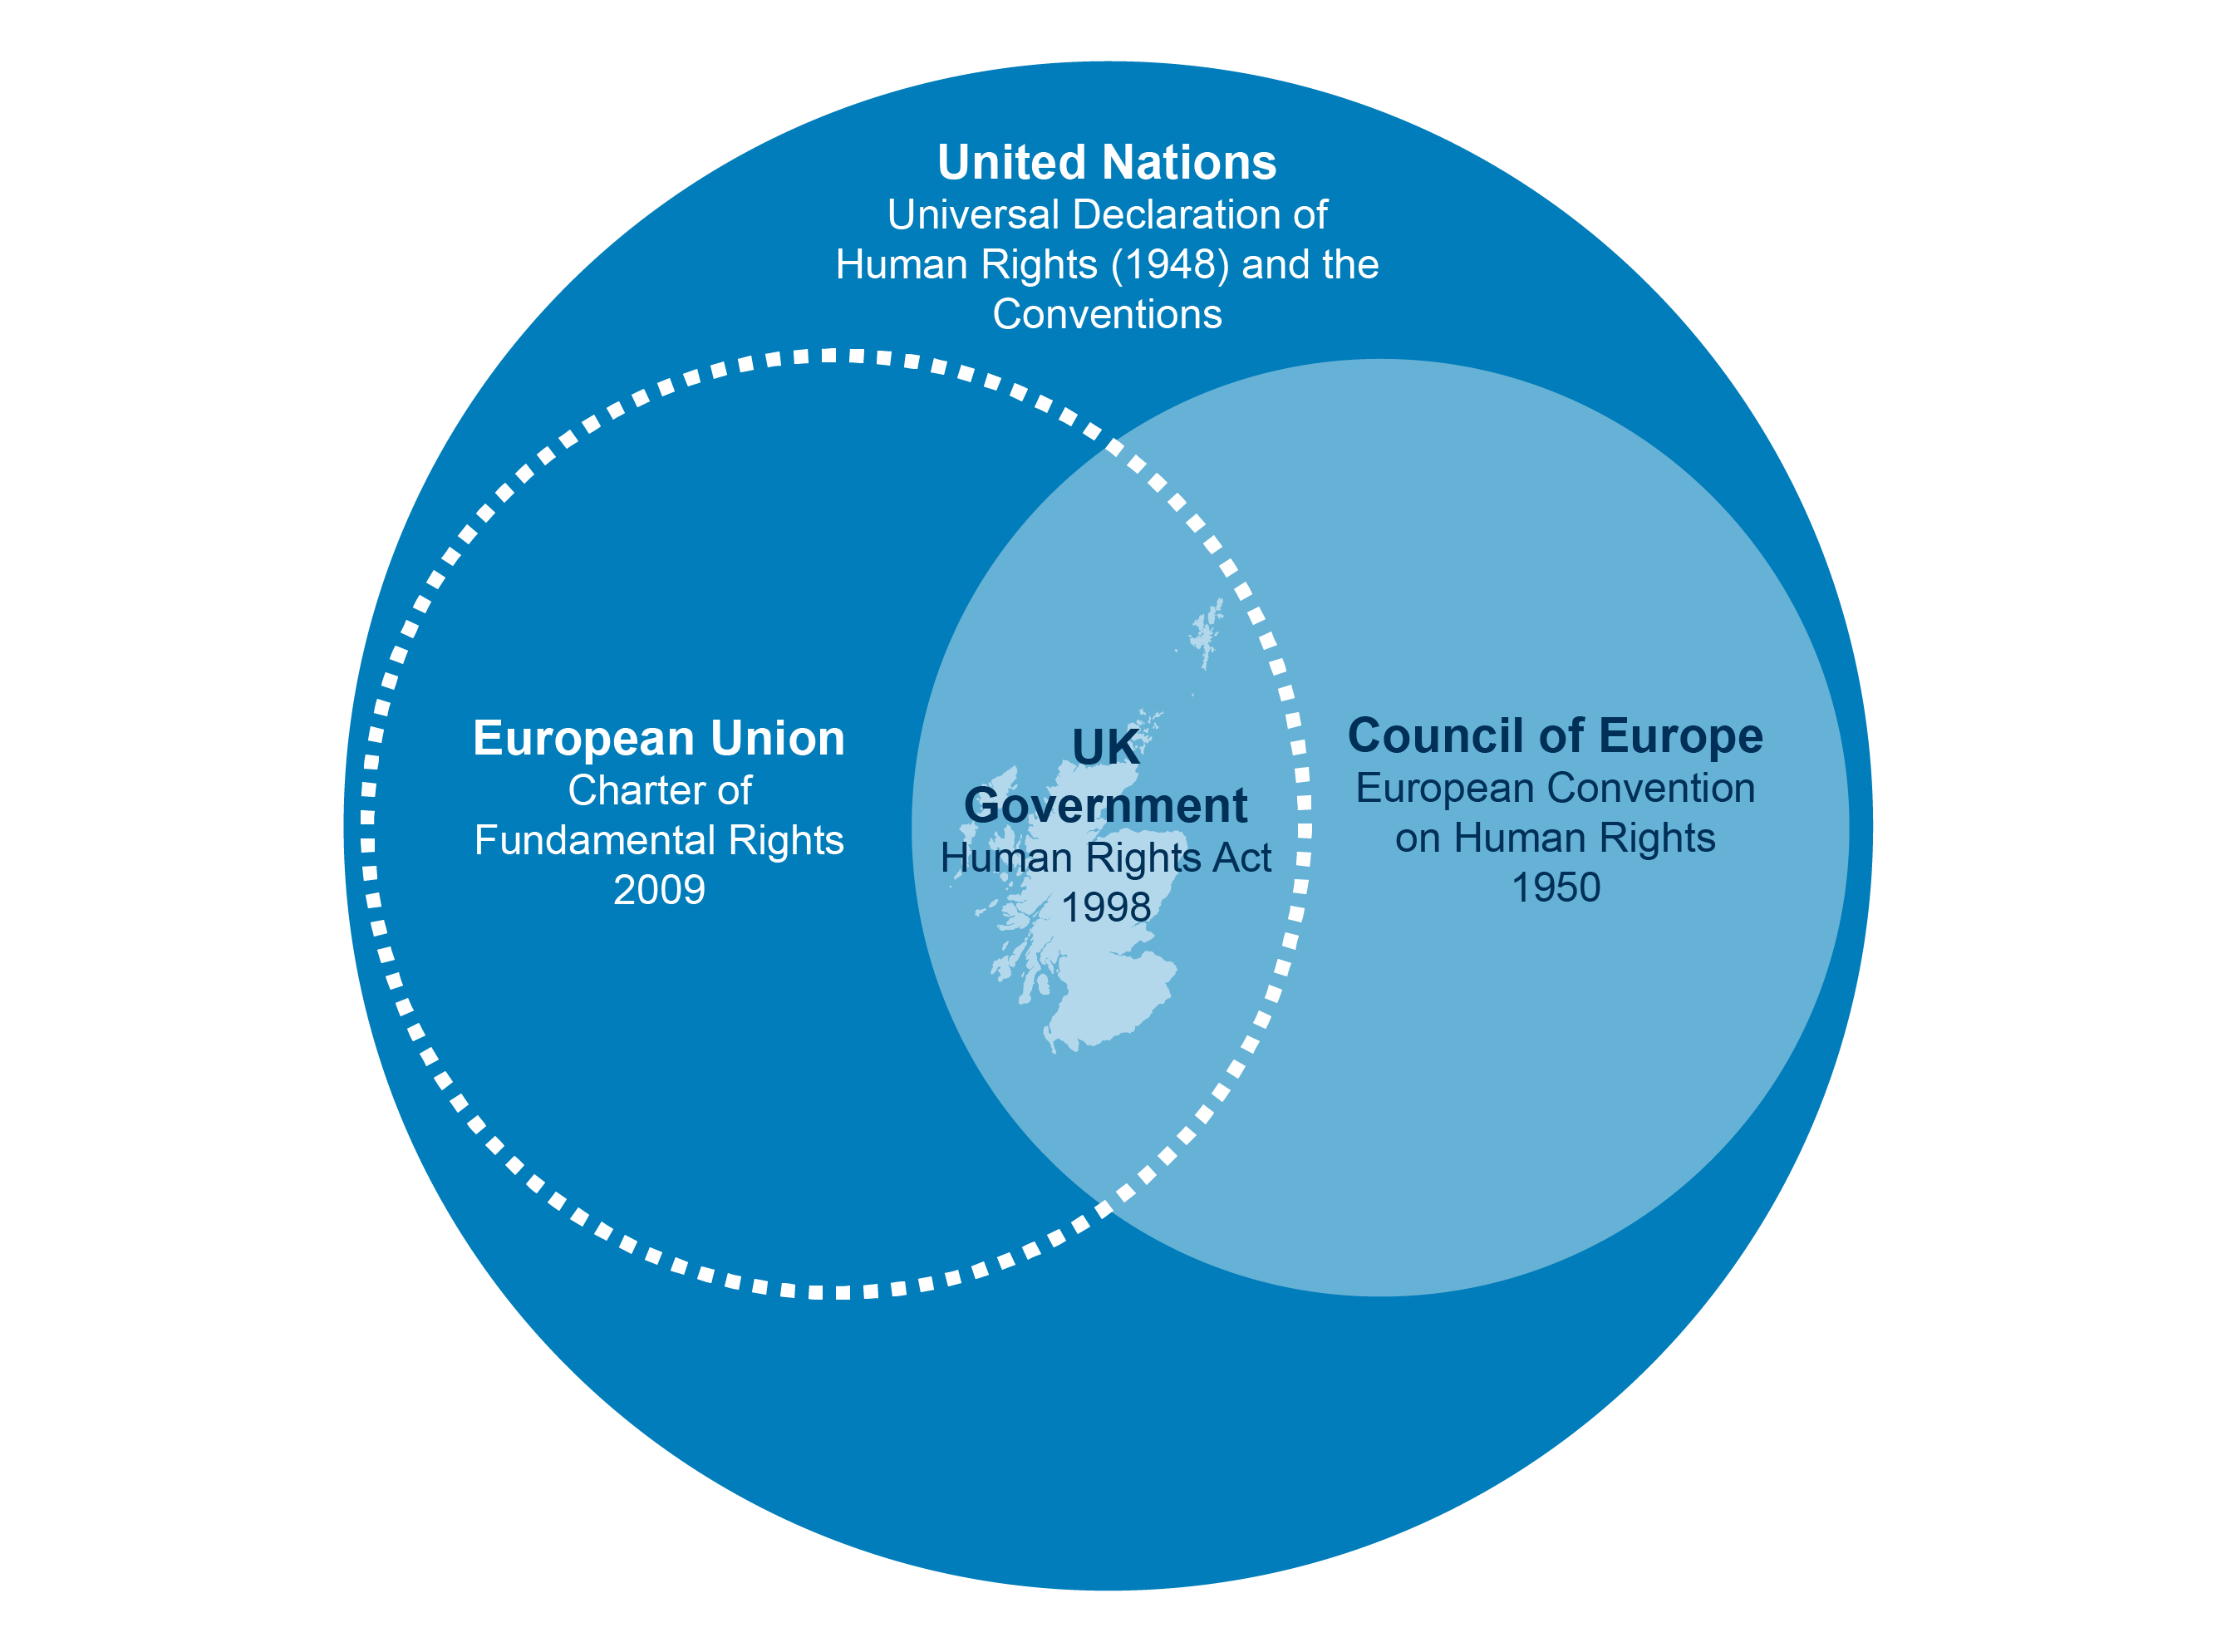 A diagram showing how the overlap between the European Union charter of fundamental rights 2009 and the  council of Europe European convention on human rights 1950 and the UK governments human rights act 1998 